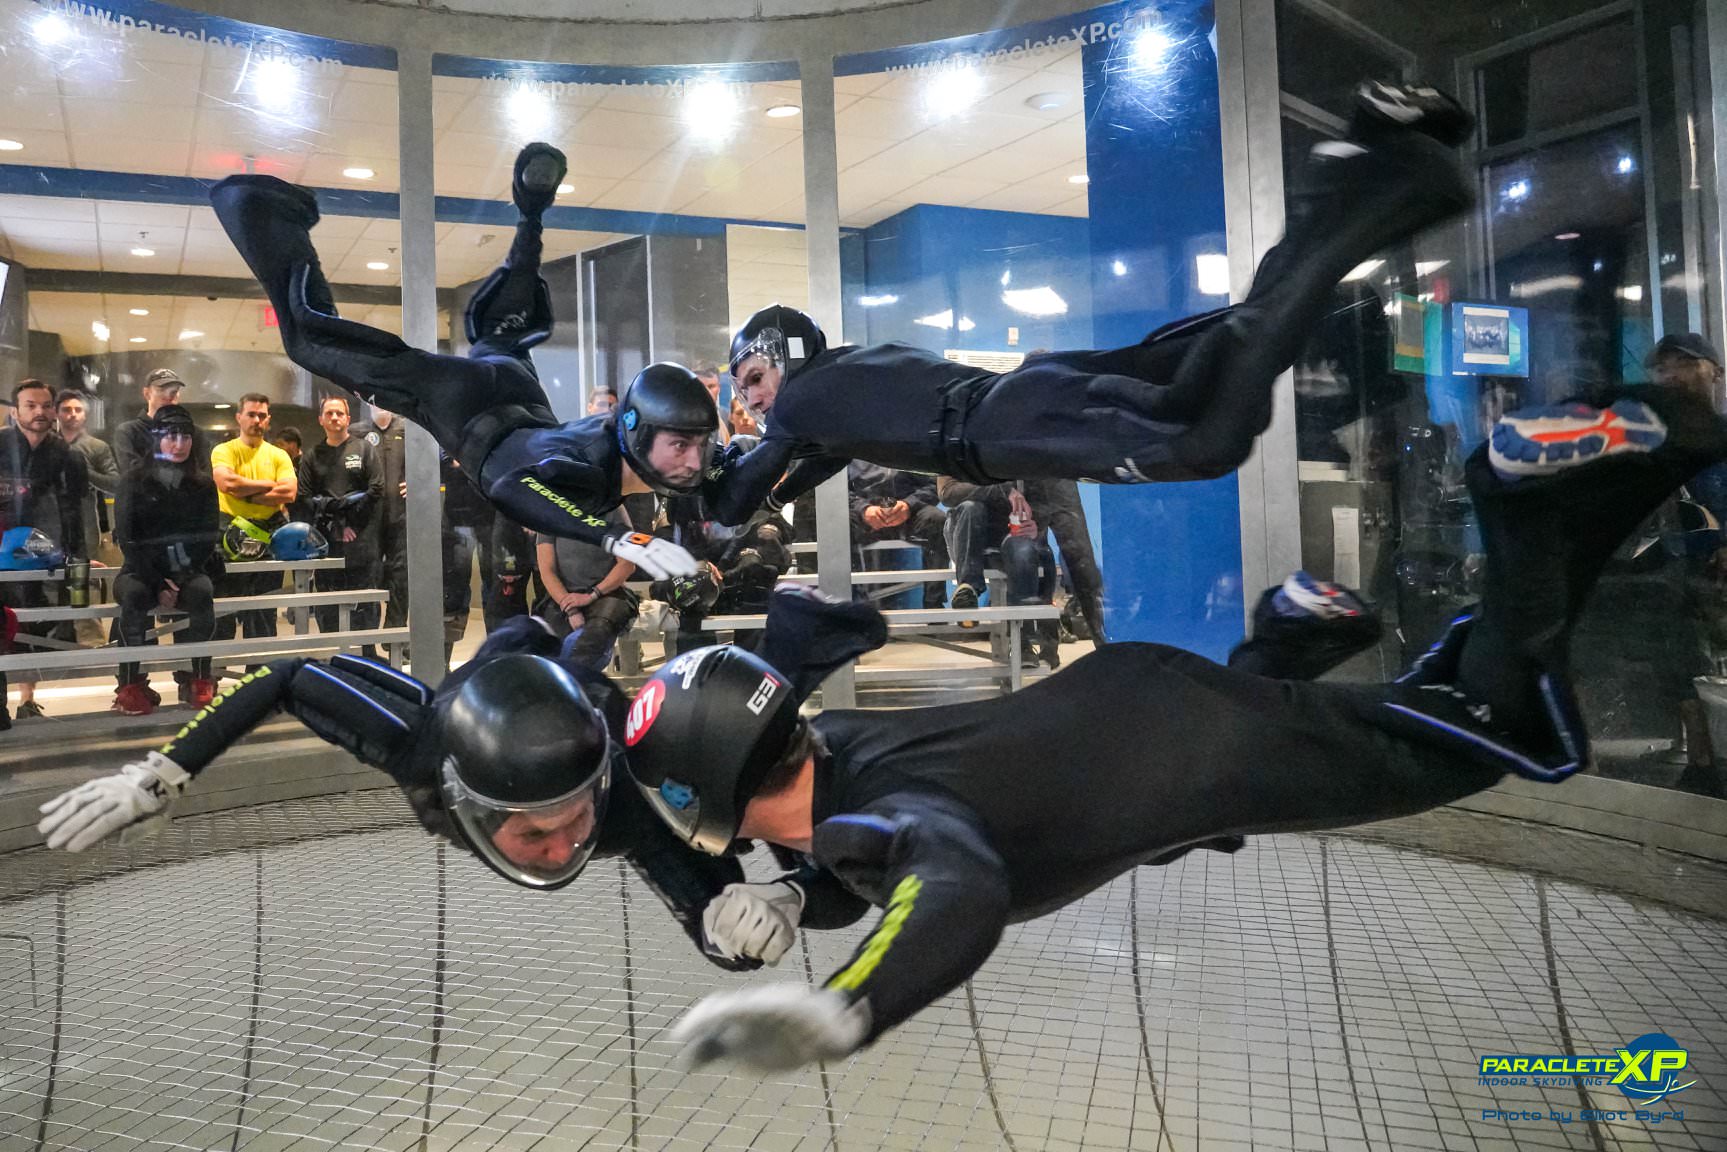 Anti-Gravity - Learn to Fly - Indoor Skydiving Near Paris